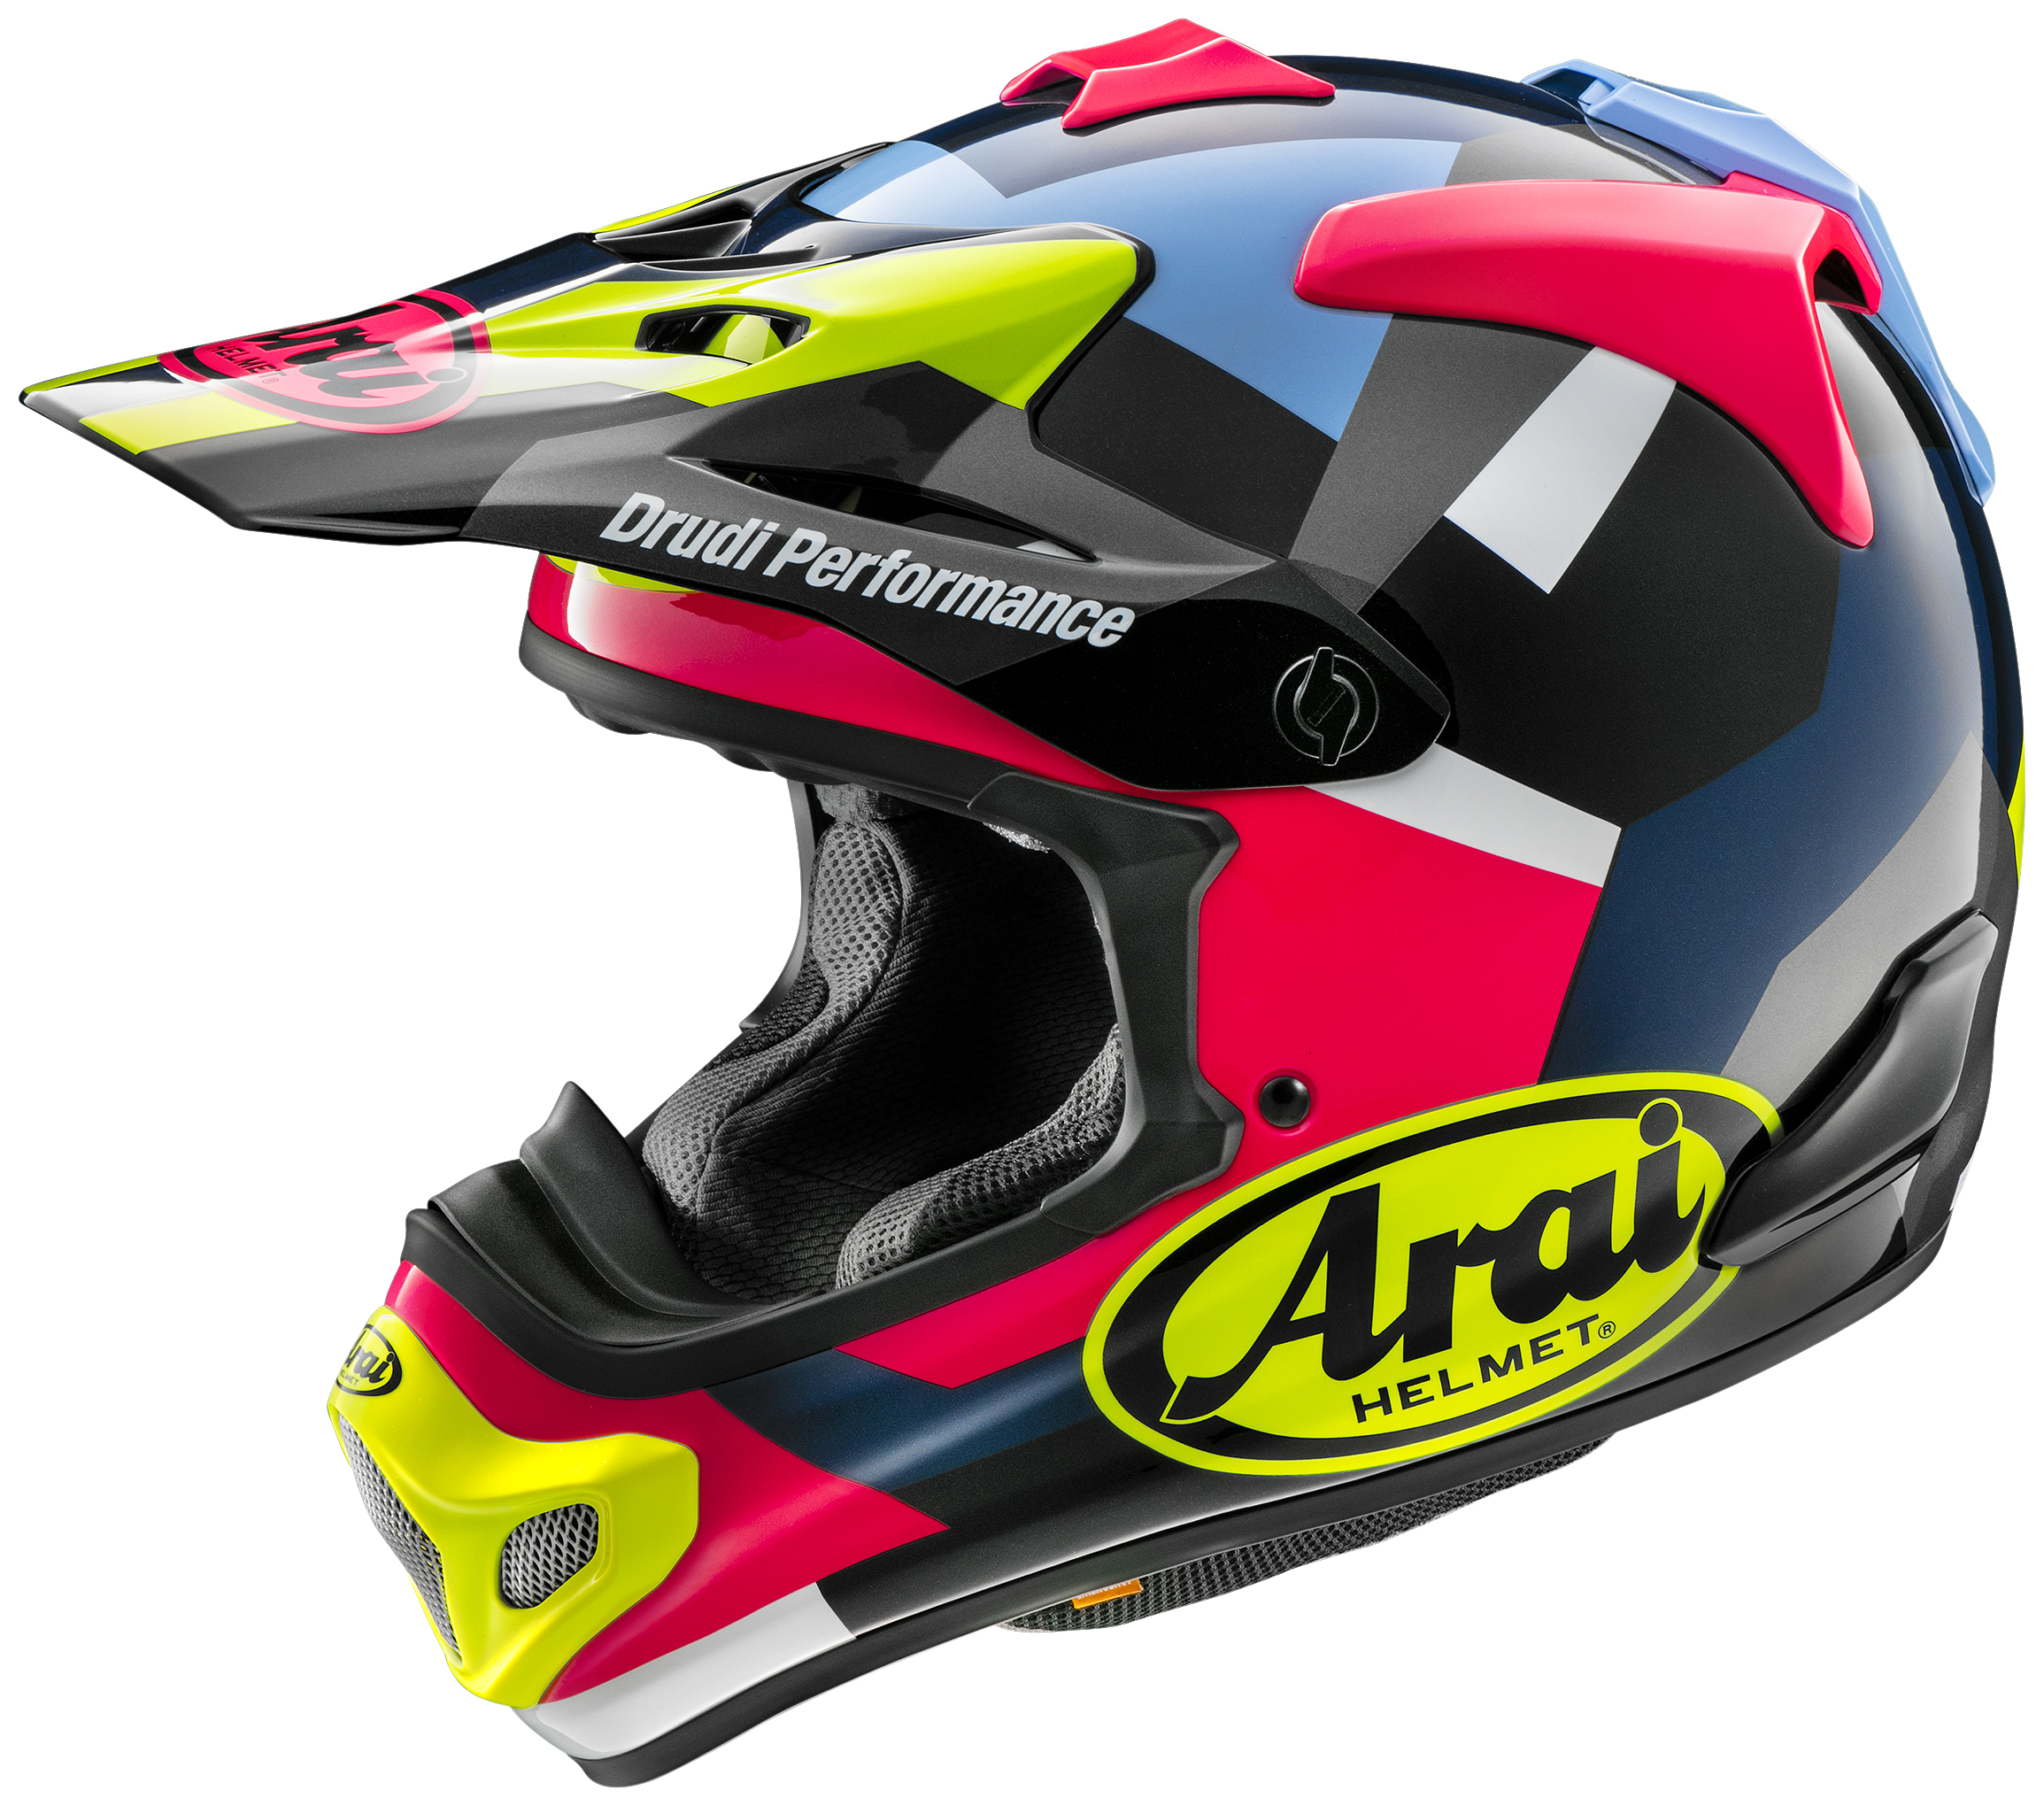 A view of the new 'block' graphic present on the Arai VX-PRO4